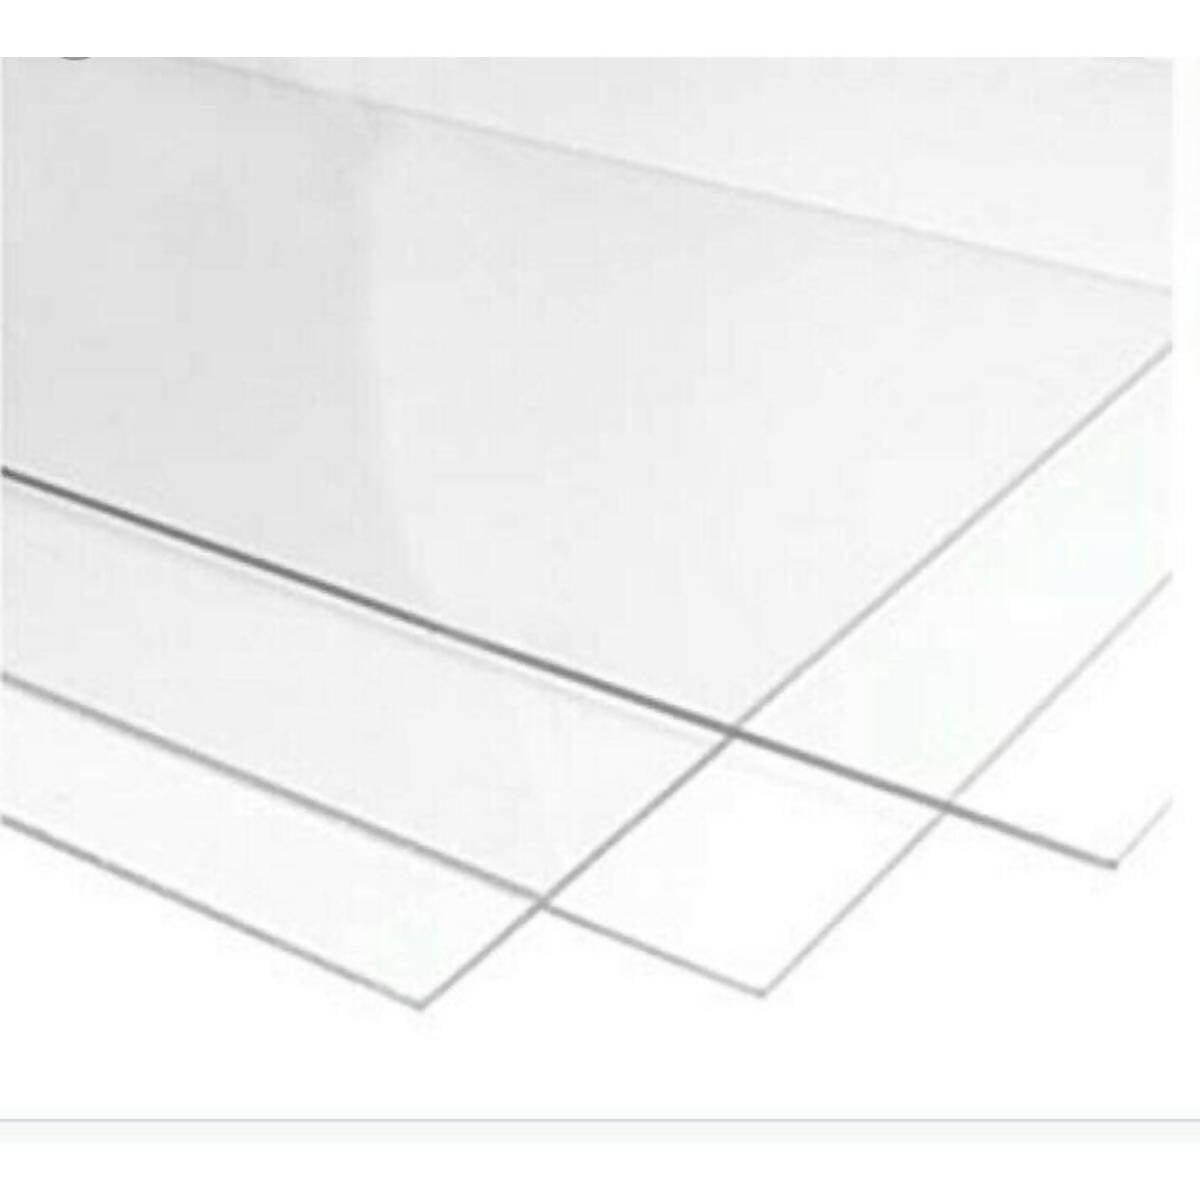 3mm Transparent Acrylic Sheet 08 x 12 Inches For Glass Painting and Art and Craft